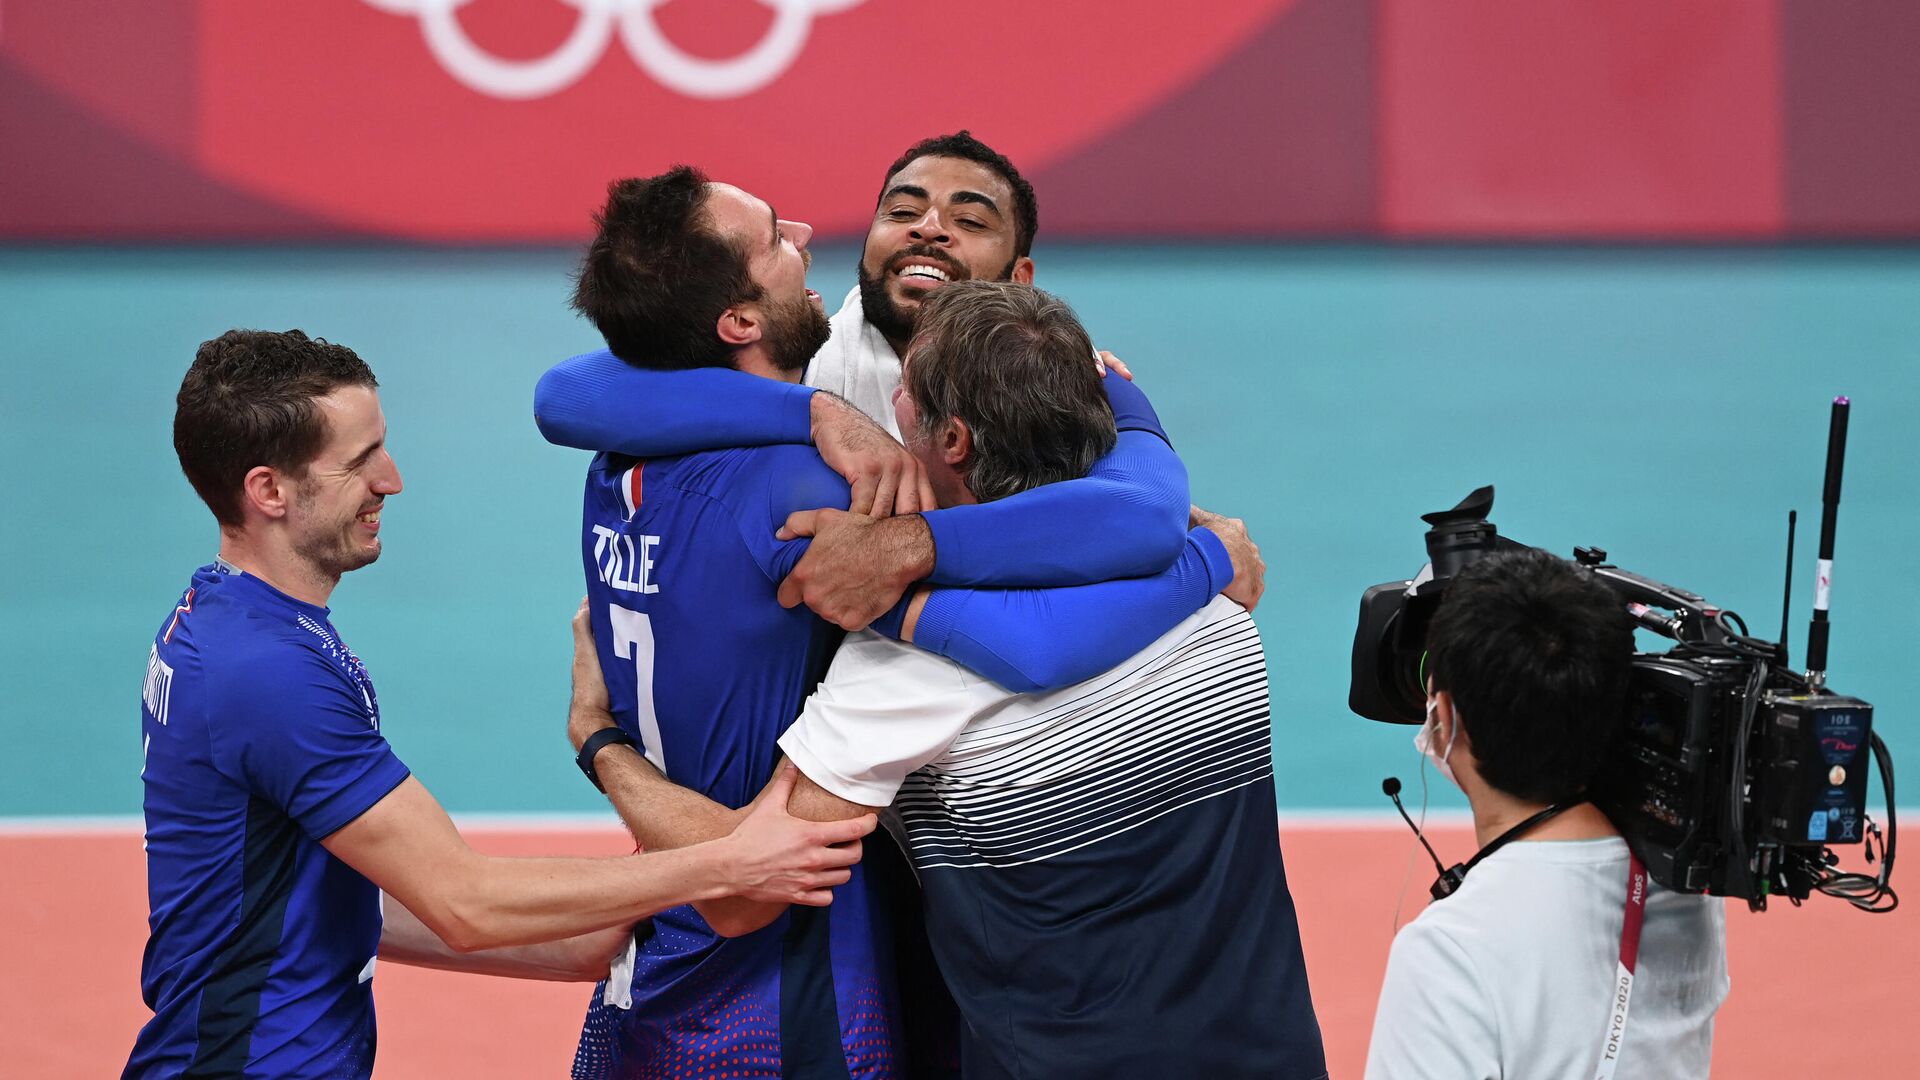 France's Earvin Ngapeth (Rear R), France's head coach Laurent Tillie (Front C-R), France's Kevin Tillie (2ndL) and France's Benjamin Toniutti celebrate their victory in the men's gold medal volleyball match between France and Russia during the Tokyo 2020 Olympic Games at Ariake Arena in Tokyo on August 7, 2021. (Photo by JUNG Yeon-je / AFP) - РИА Новости, 1920, 07.08.2021